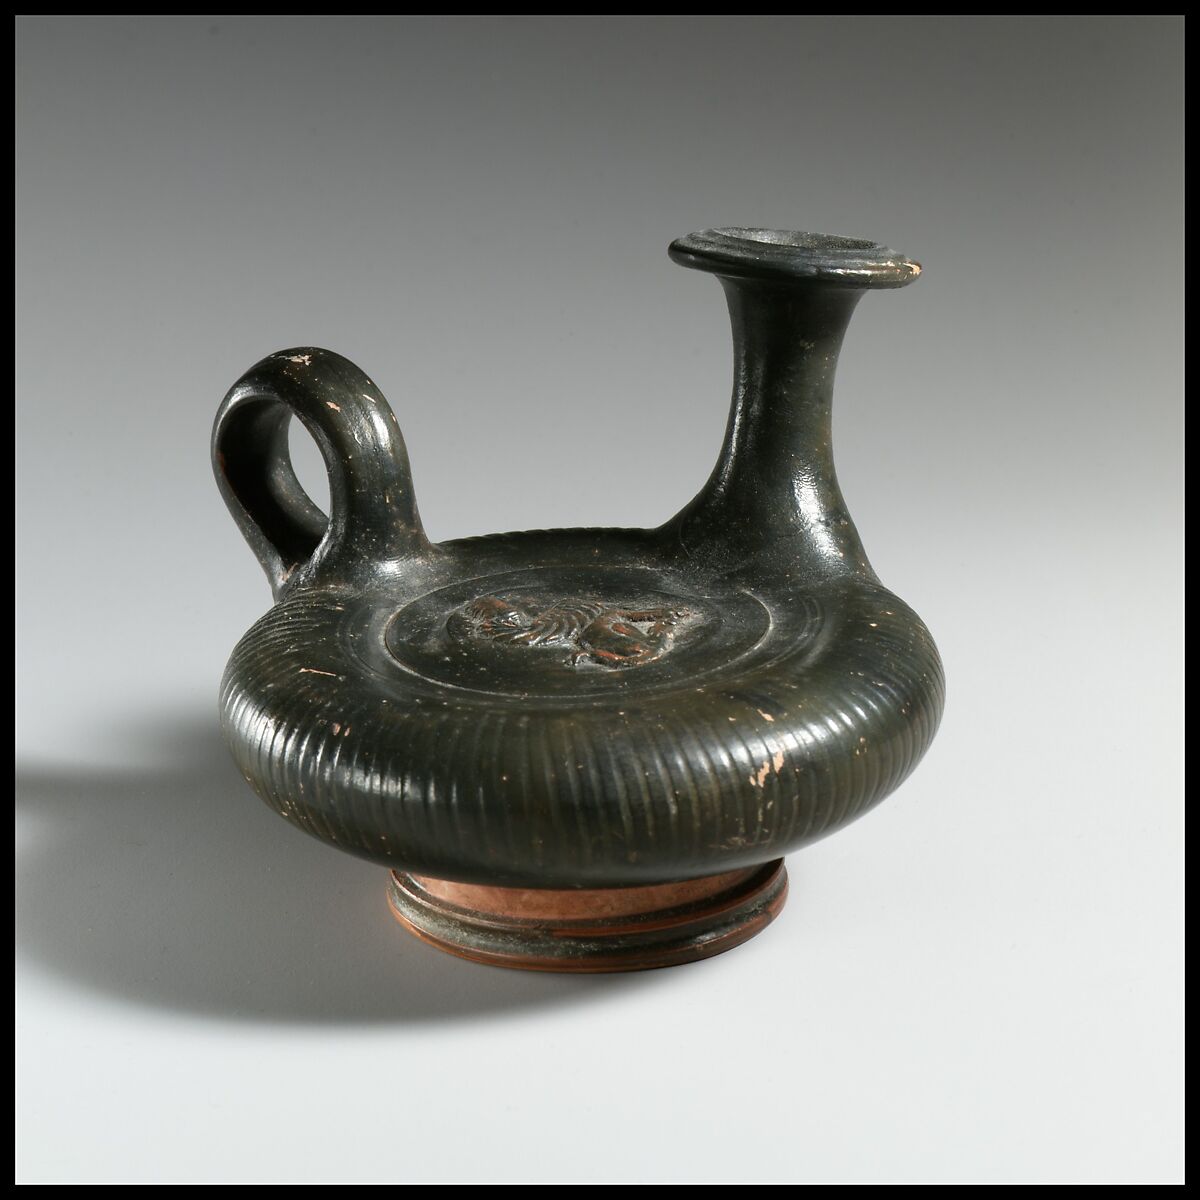 Terracotta guttus (flask with handle and verticle spout), Terracotta, Greek, South Italian, Campanian 